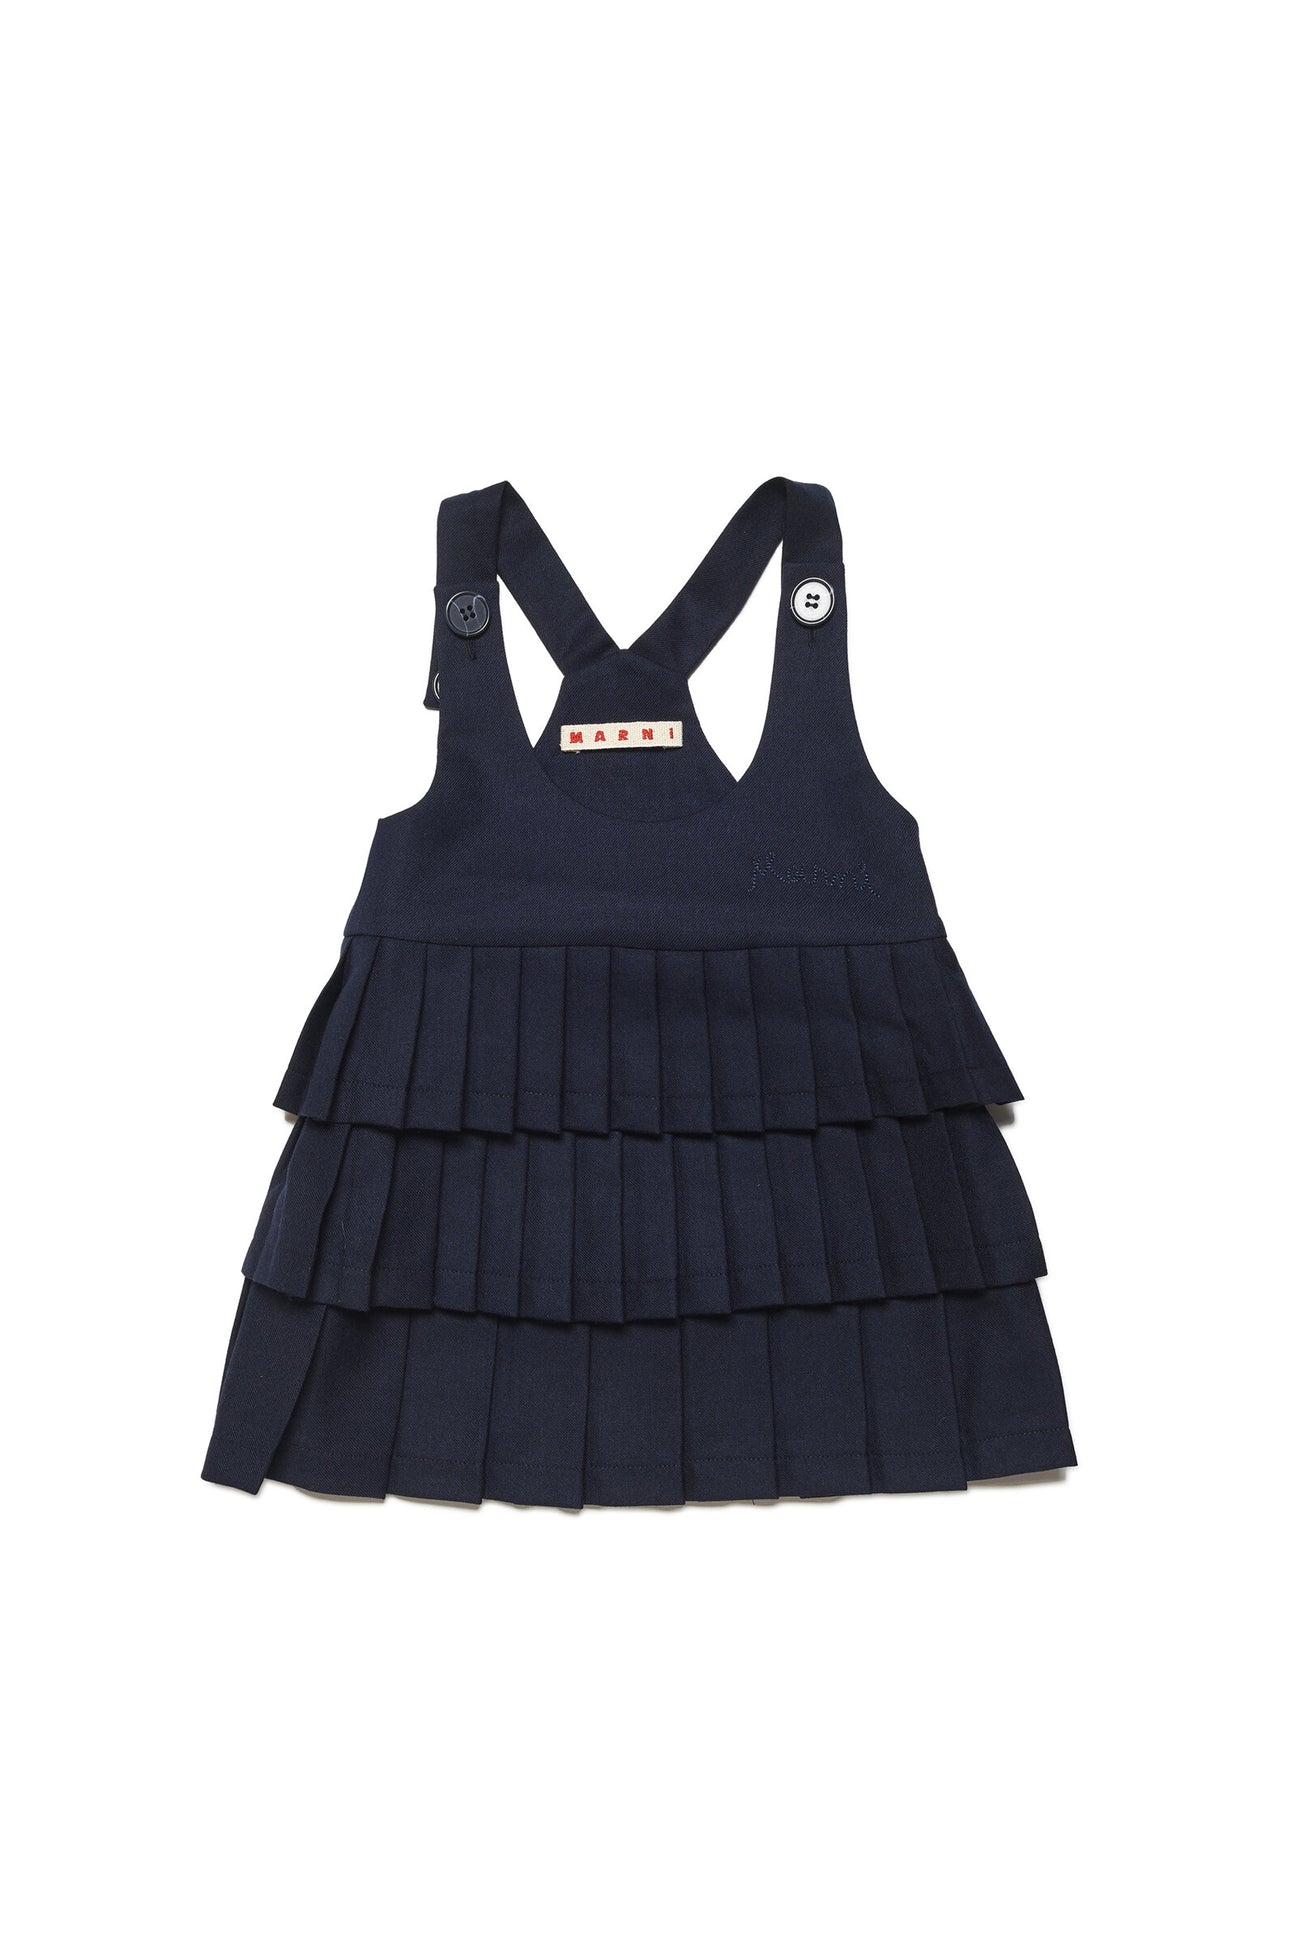 Flannel dungaree dress with pleated skirt Flannel dungaree dress with pleated skirt